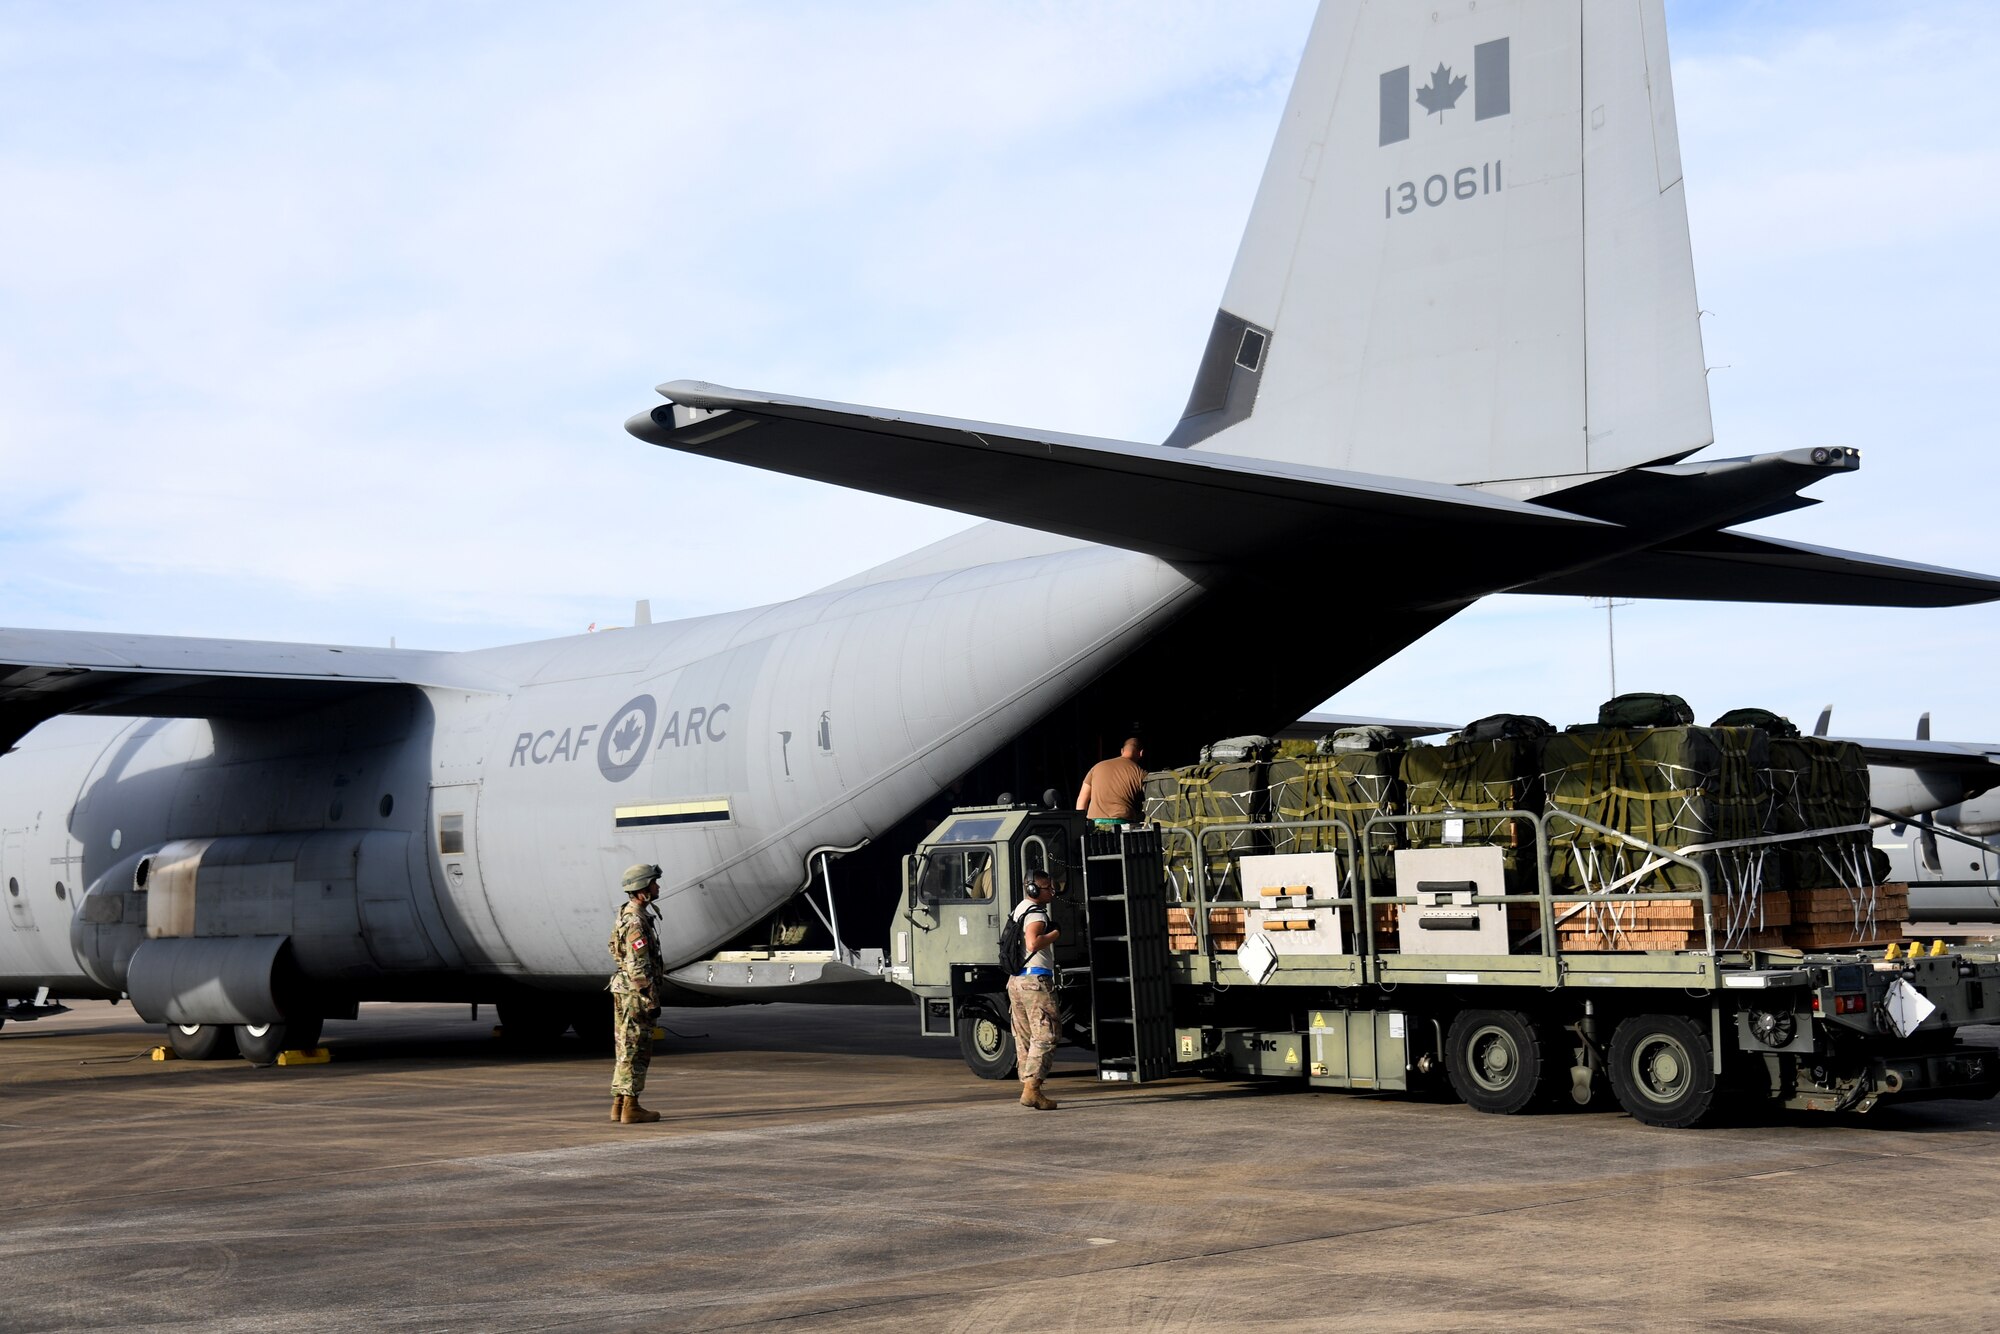 U.S. Air Force aerial porters from the 621st Contingency Response Group load cargo onto a Royal Canadian Air Force C-130 aircraft during exercise Green Flag Little Rock, Oct. 24, 2019, Alexandria International Airport, Louisiana. During the exercise the team loaded and downloaded tactical vehicles, airdrop bundles, along with a variety of other pallets to support the Army. (U.S. Air Force photo by Tech. Sgt. Liliana Moreno)